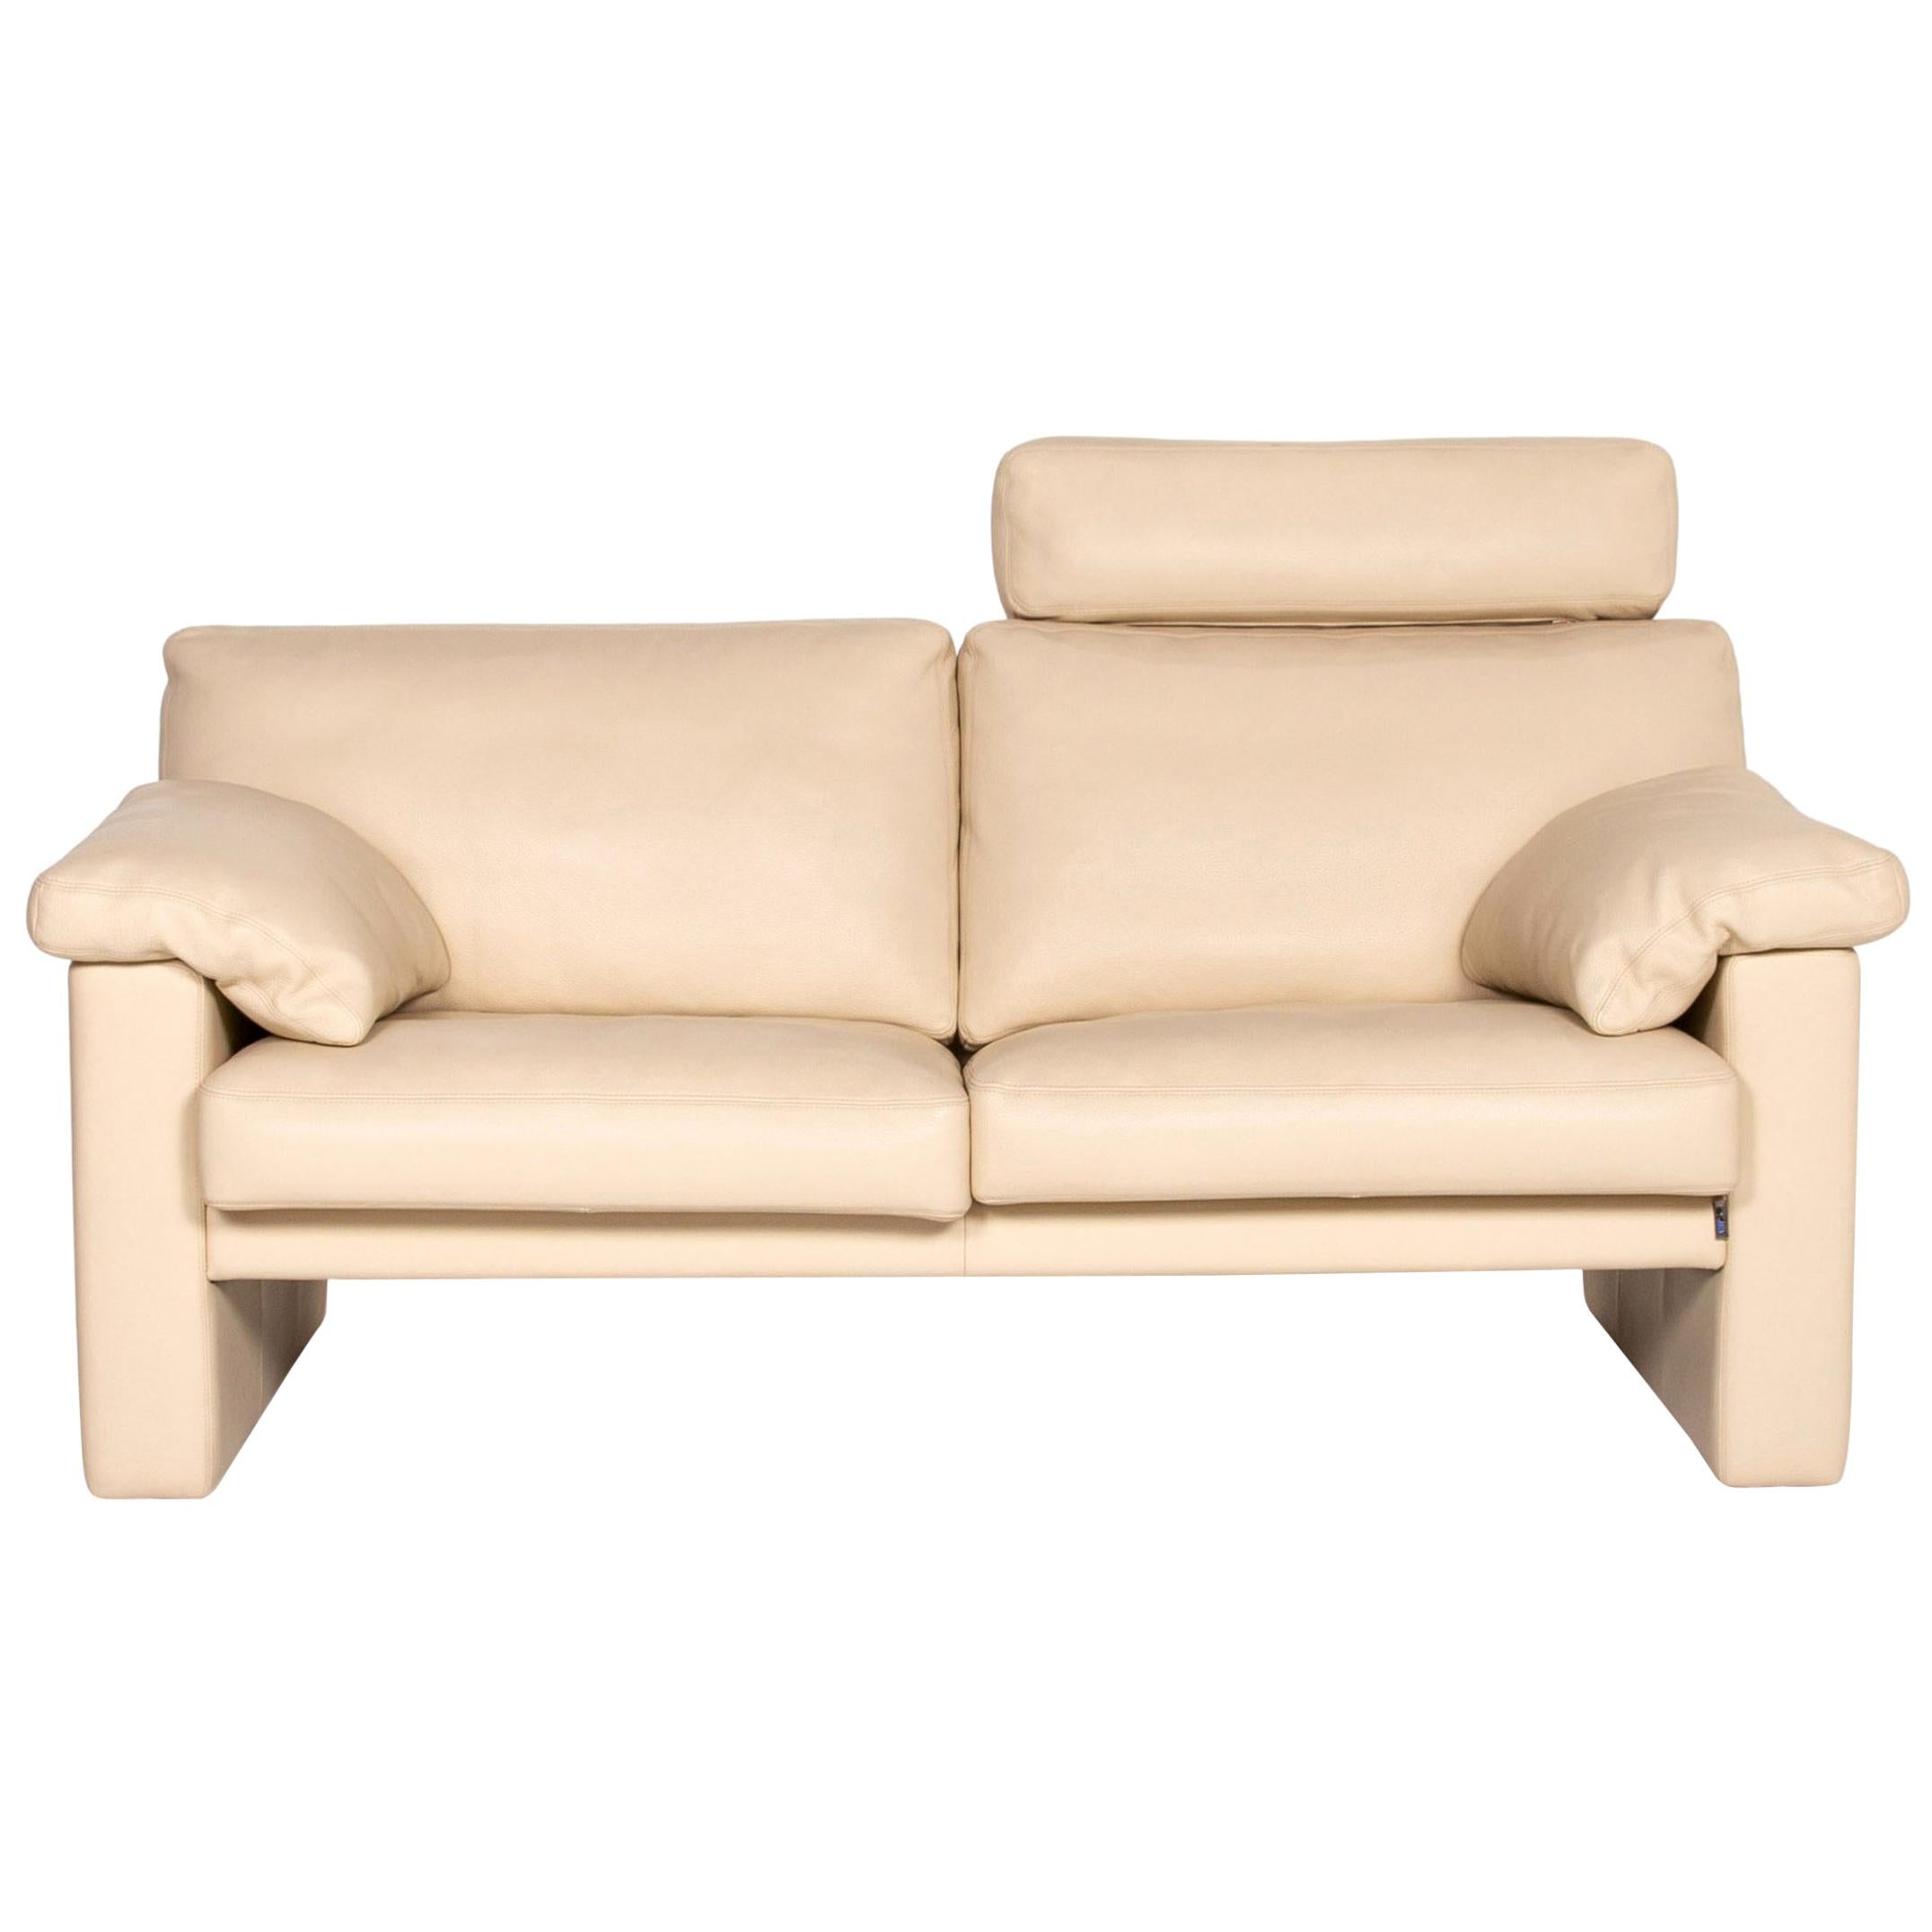 Erpo Leather Sofa Cream Two-Seat Function Couch For Sale